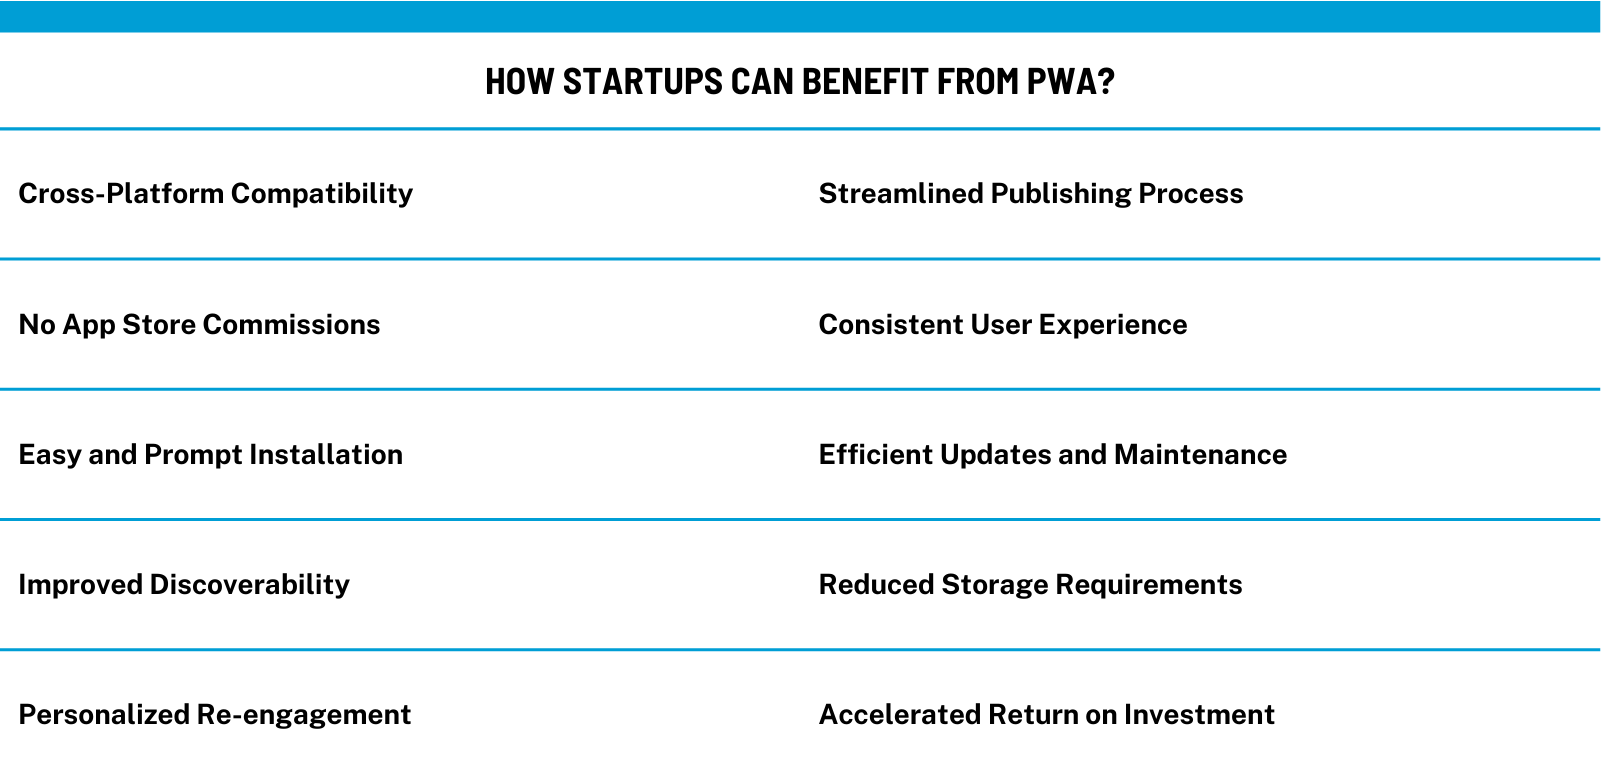 Infographic summarizing the advantages of PWAs for startups, including cross-platform compatibility, no app store commissions, easy installation, consistent user experience, efficient maintenance, improved discoverability, minimal storage space, personalized re-engagement, and quick ROI.